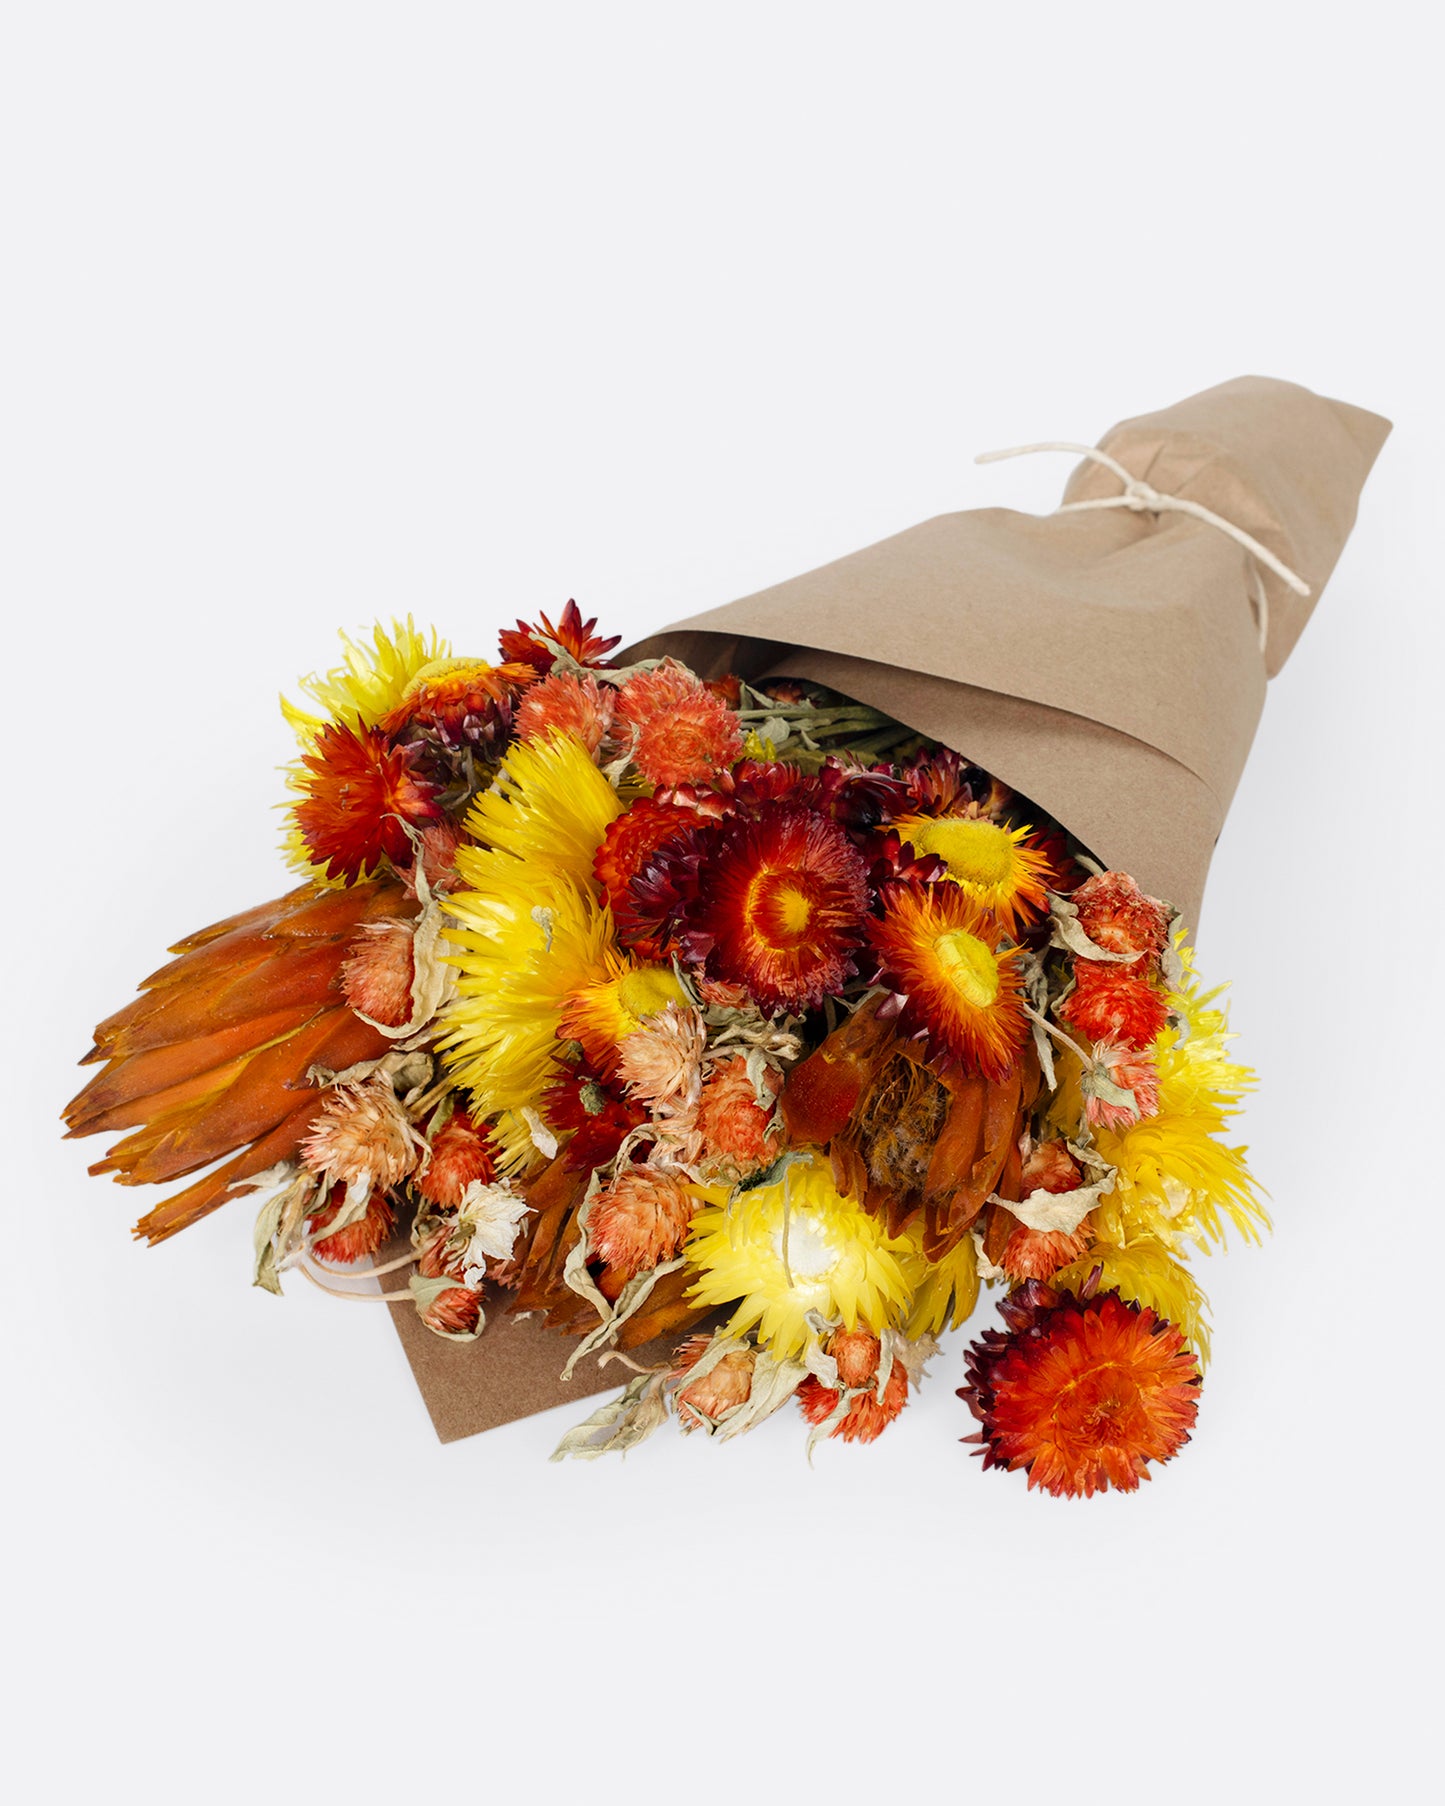 A warm dried floral arrangement of reds and yellows.